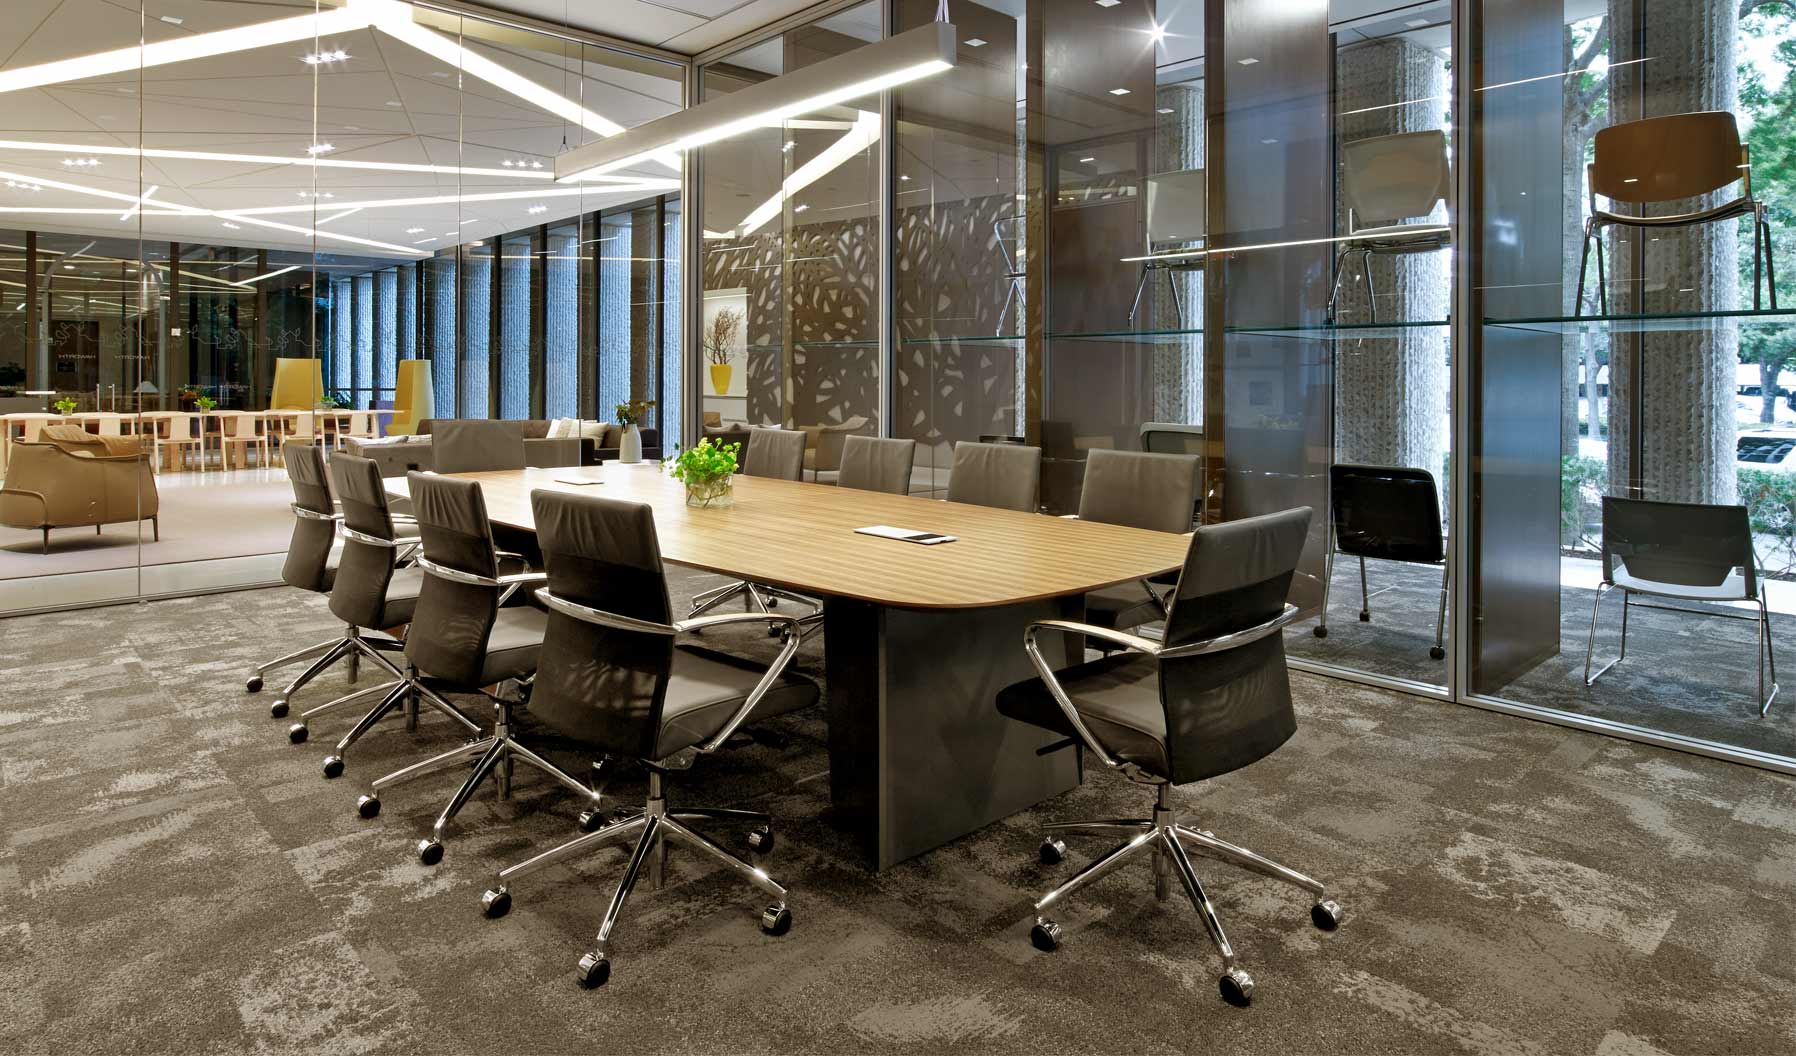 This meeting space supports collaboration as well as a warm and inviting culture within the workplace. The adjacency to lounge seating and a floor to ceiling seating display add another layer beyond the great natural light this space offers.